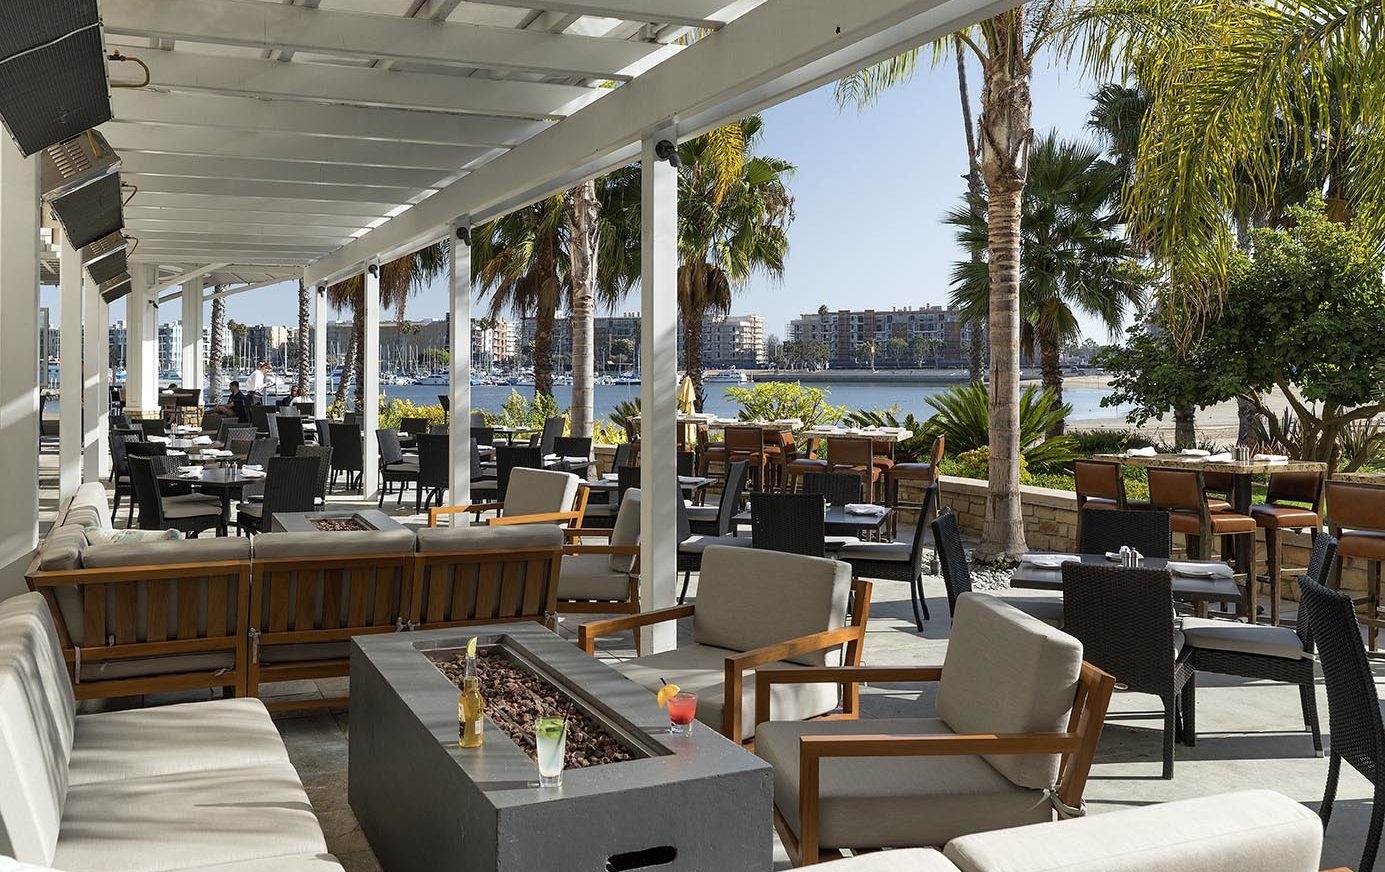 Outdoor dining patio at Beachside restaurant with view of Marina "Mother's" Beach